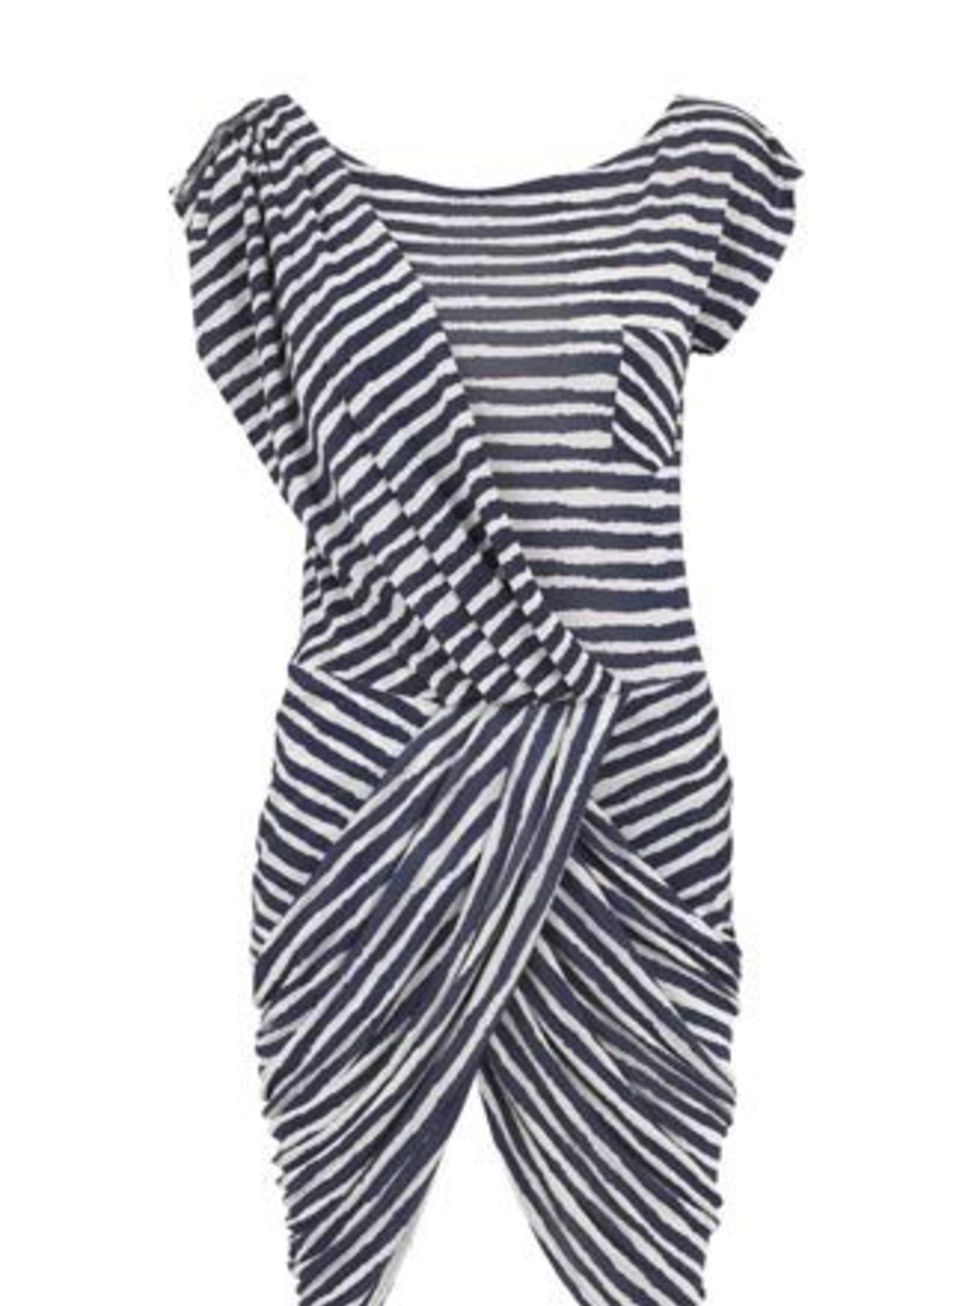 <p>This dress has been causing a stir since we featured it.You can all rest easy, its from M&amp;S, its under £30 quid and its in store this week. Expect queues.</p><p>Dress, £29.50 by <a href="http://www.marksandspencer.com/">Marks &amp; Spencer</a></